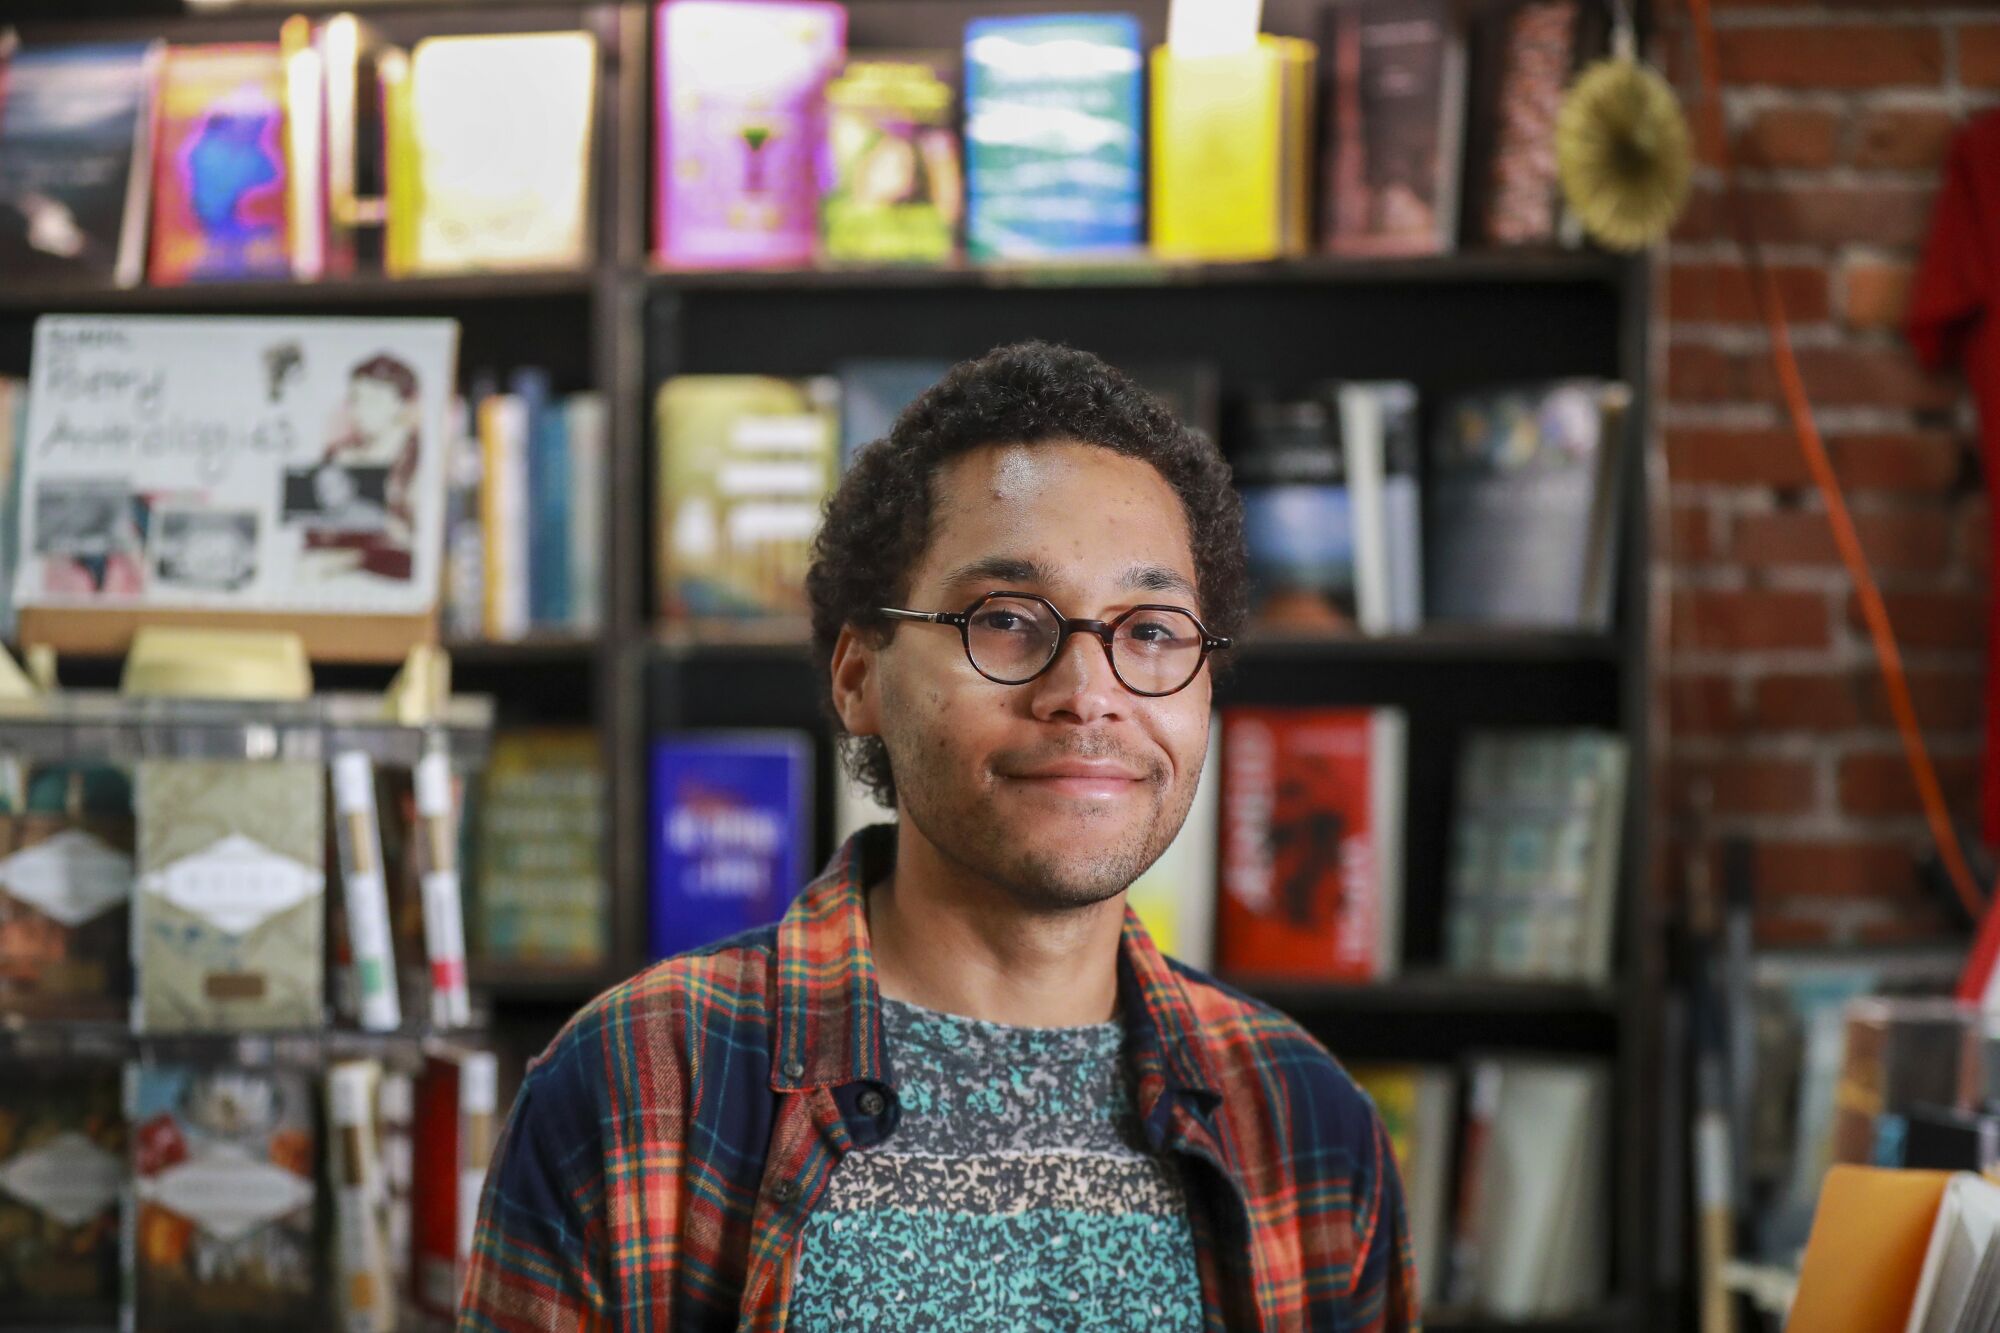 A man wearing a flannel shirt in a bookstore.